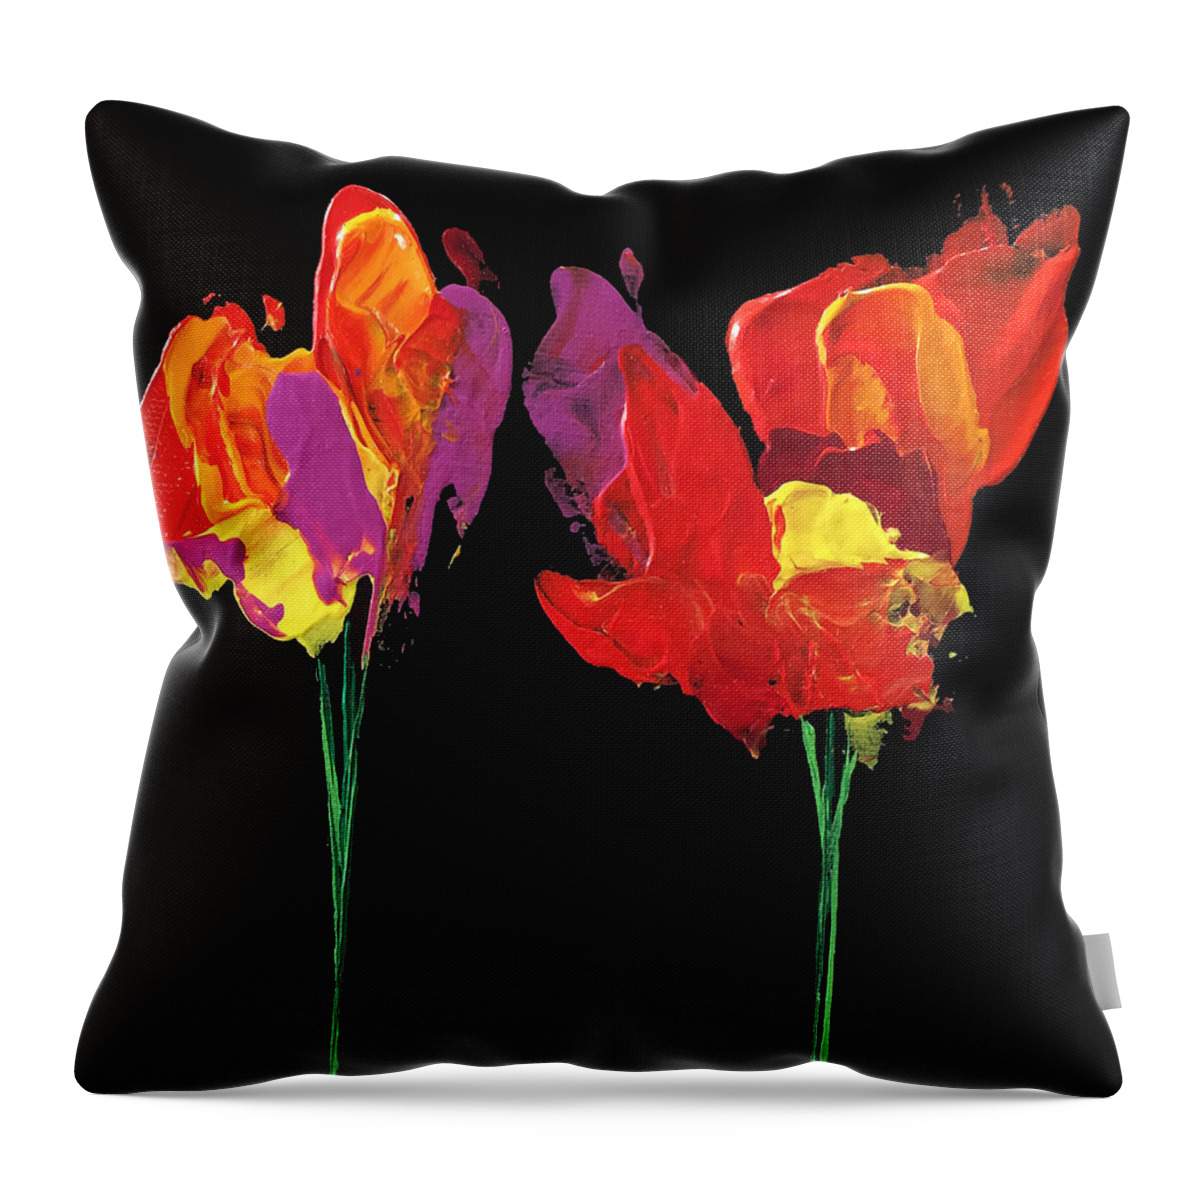 Flowers Throw Pillow featuring the painting Abstract Pals by Linda Bailey